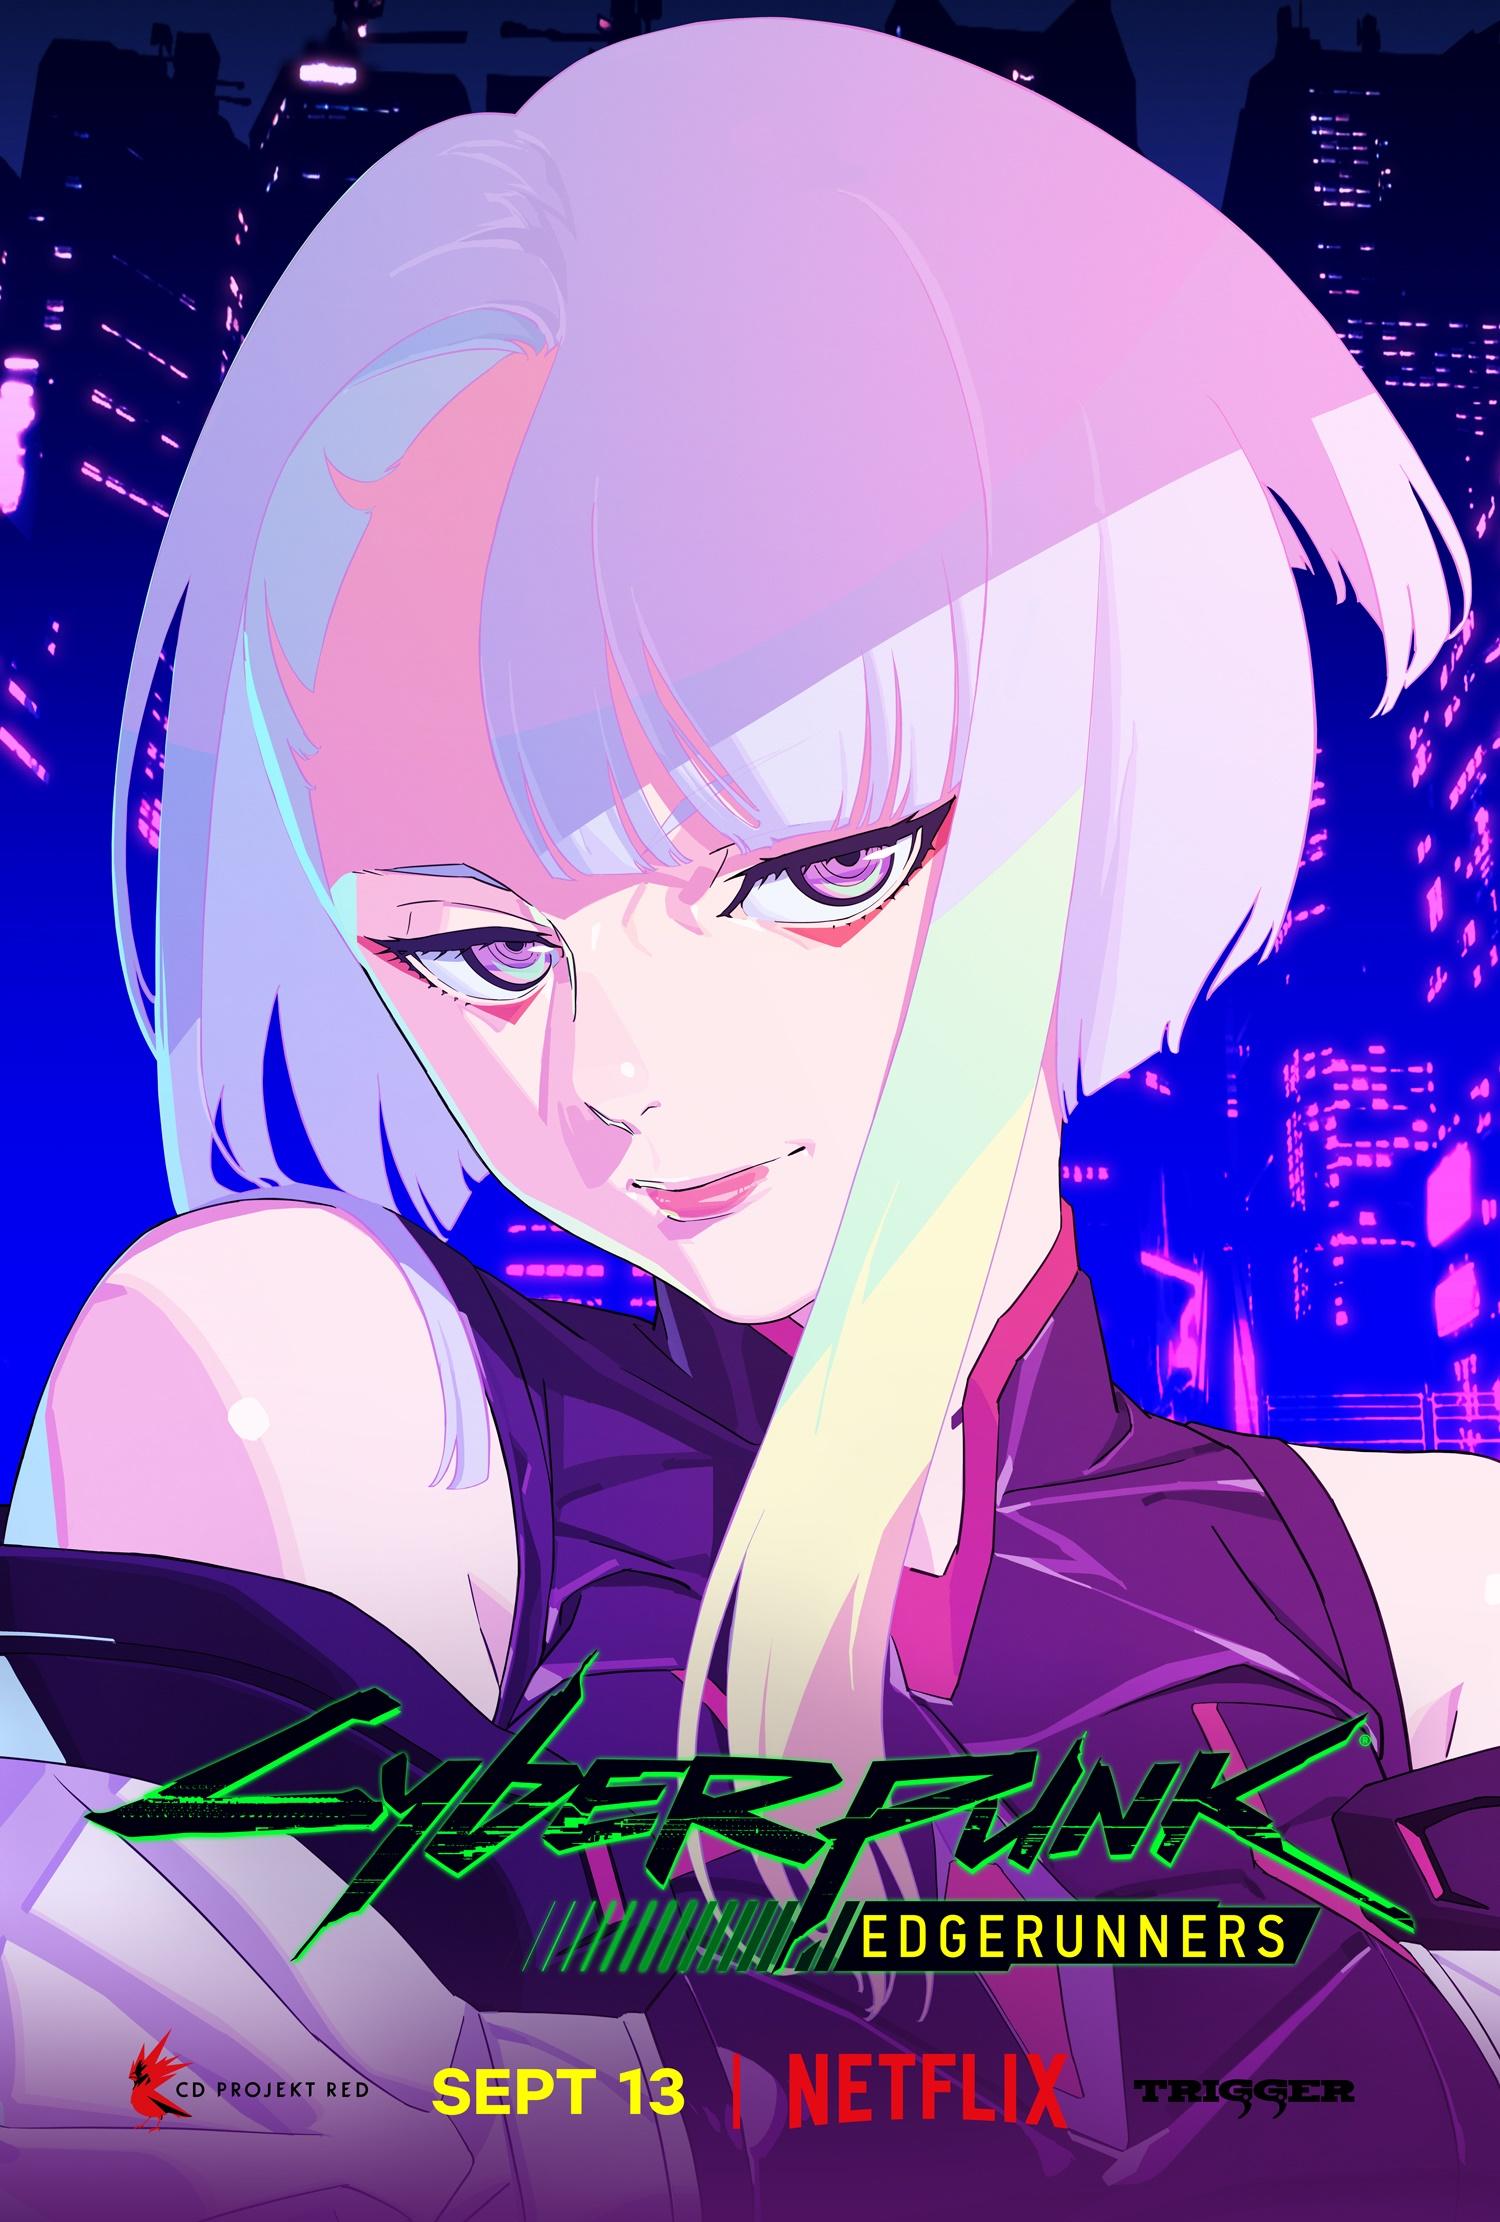 cyberpunk-edgerunners-lucy-poster-new-cropped-hed.jpg